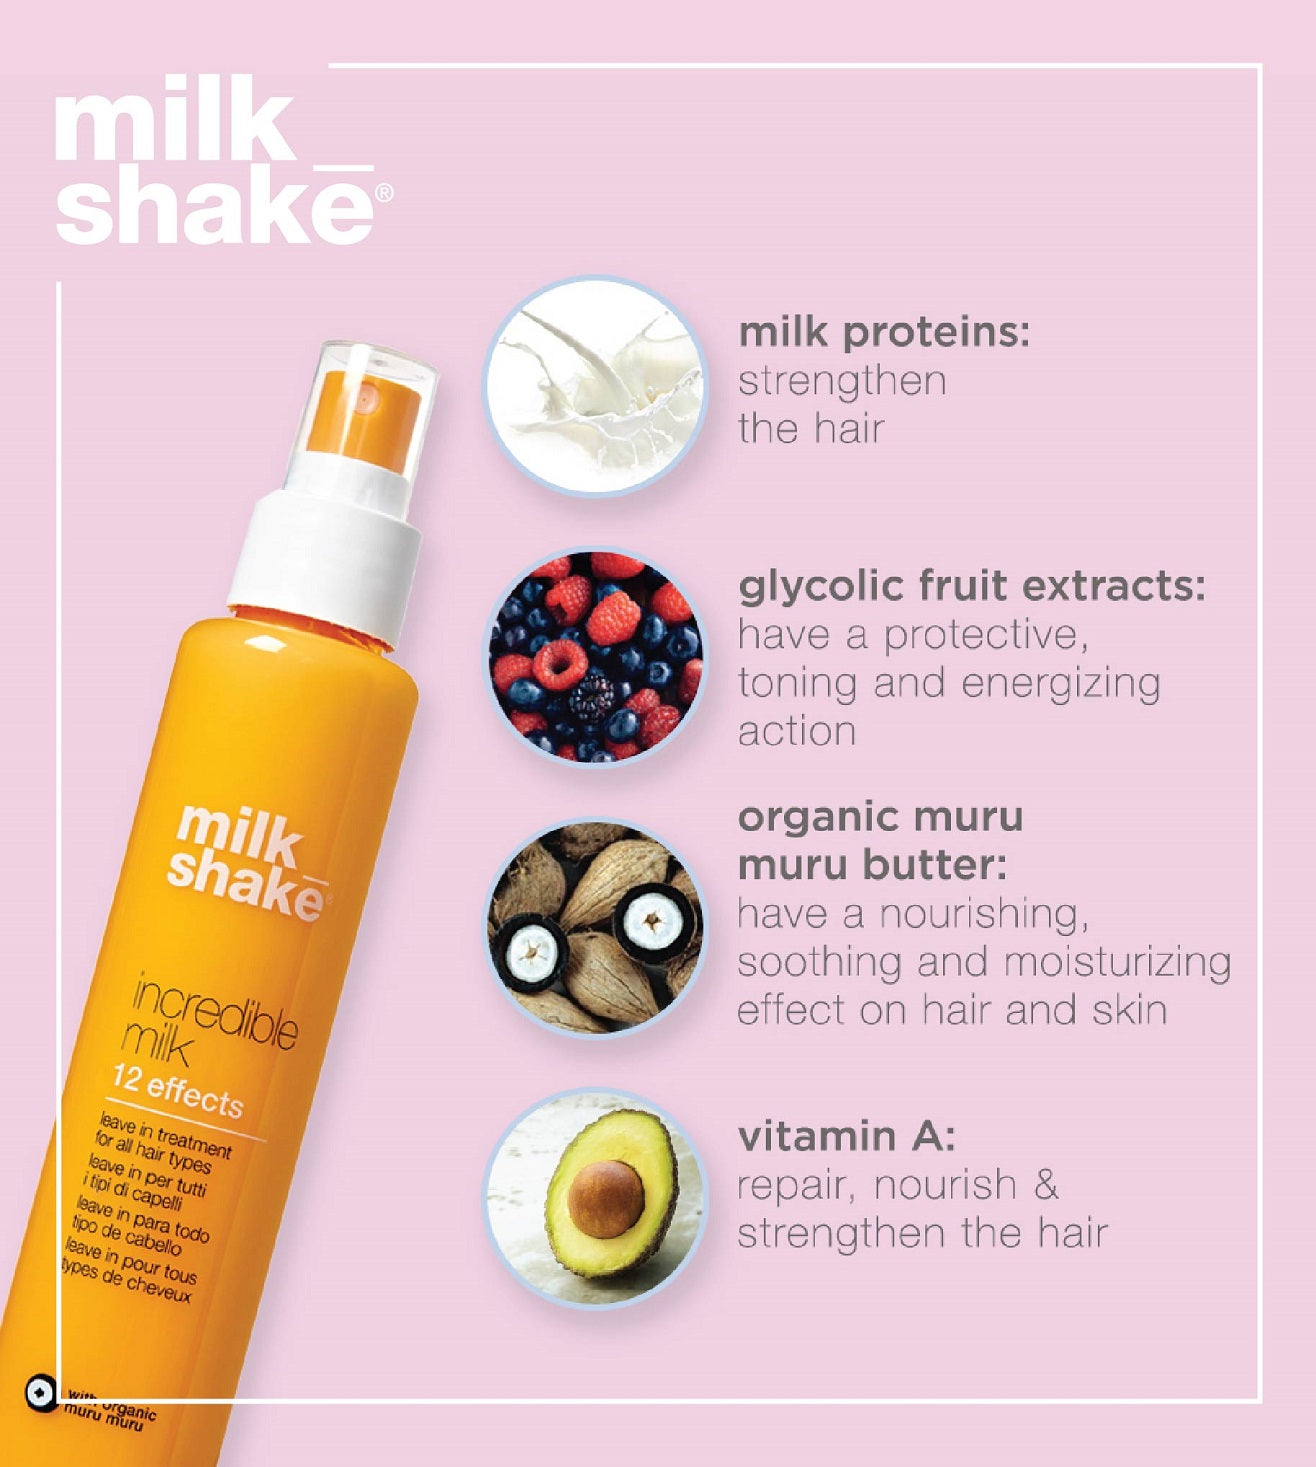 Are you using the right amount of hair product? – Milkshake USA